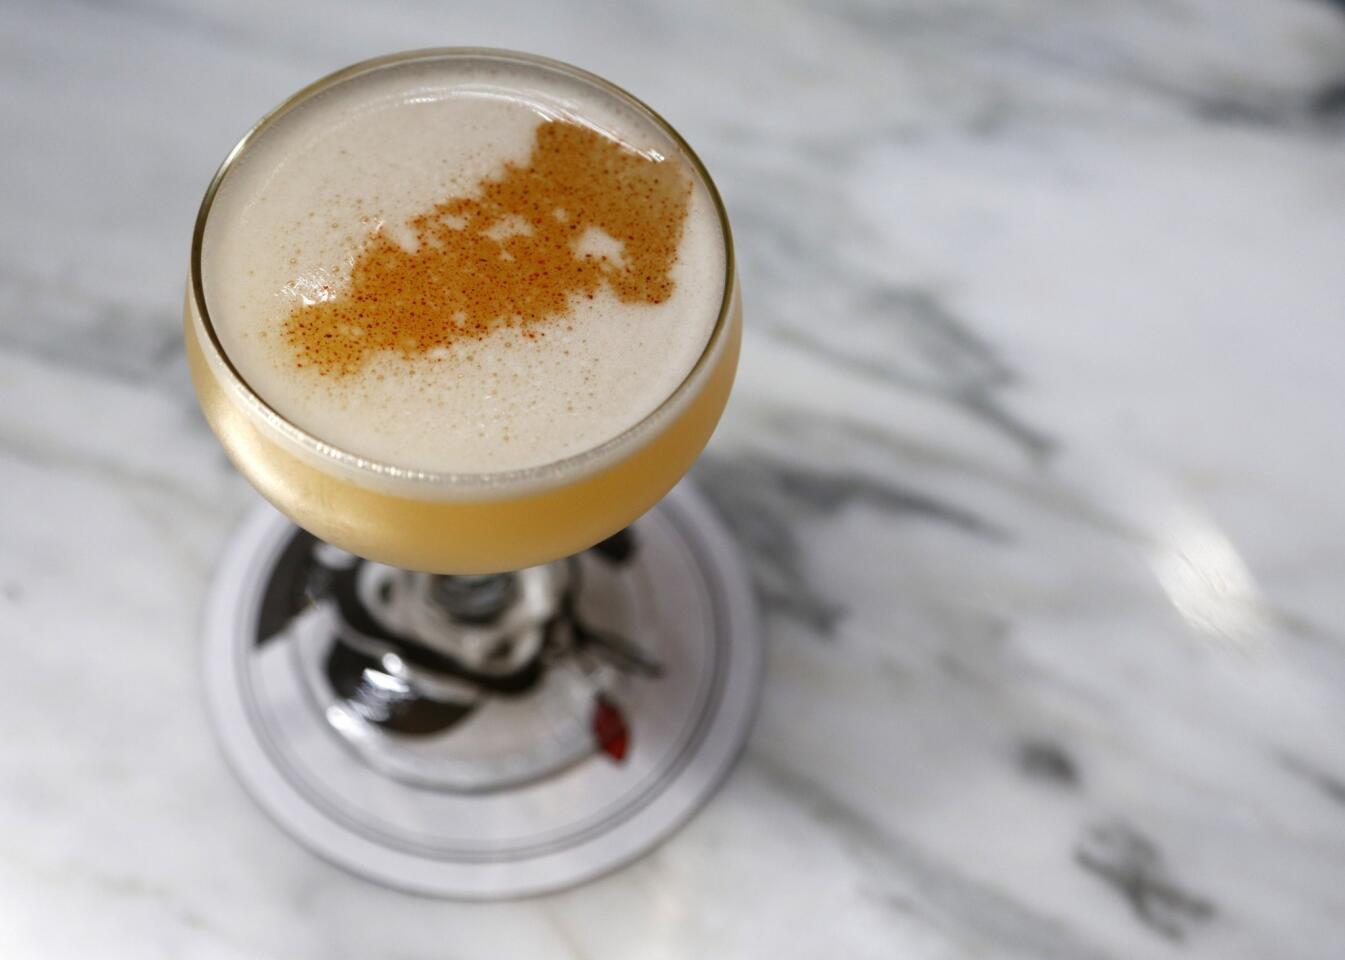 The Capone's, made with Bulleit rye, fresh lemon juice and cayenne pepper, is one of the cocktails on the drink menu.